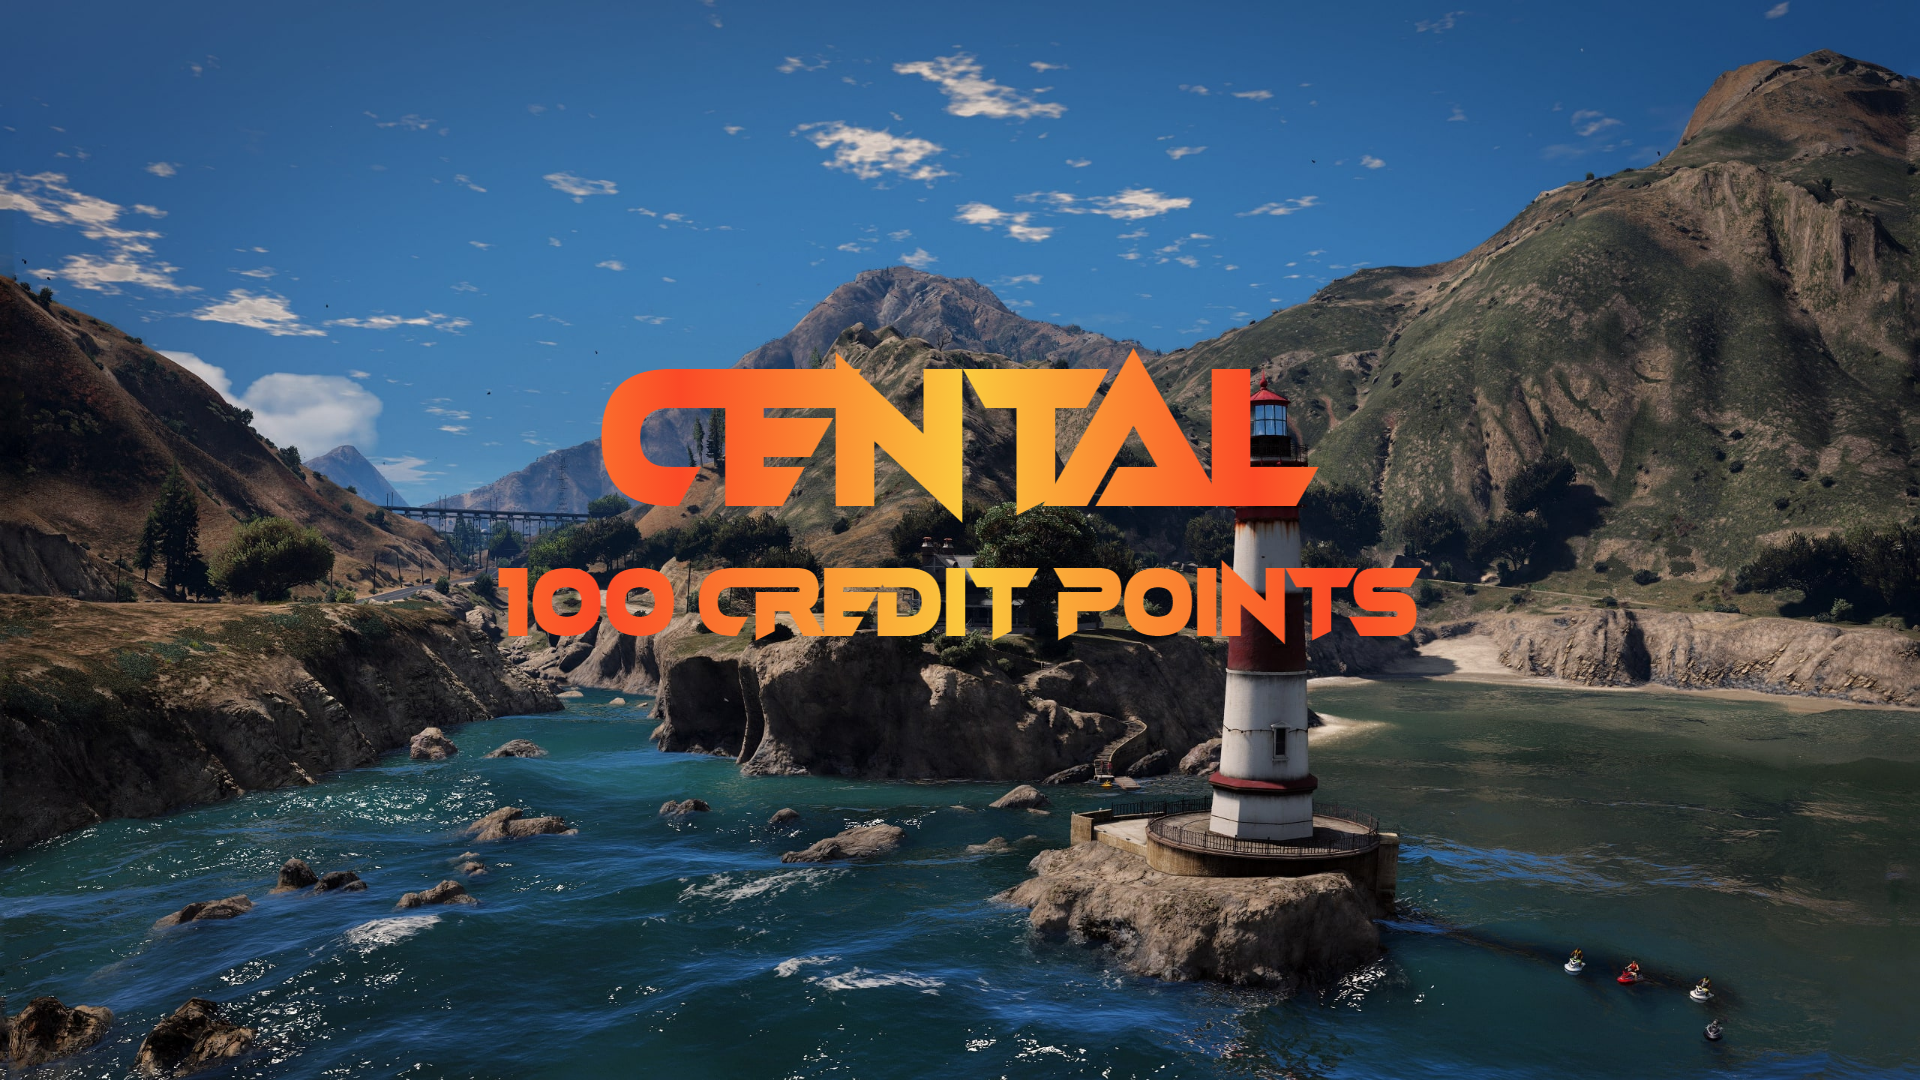 CentralRP - 100 Credit Points Gift Card 11.29 usd